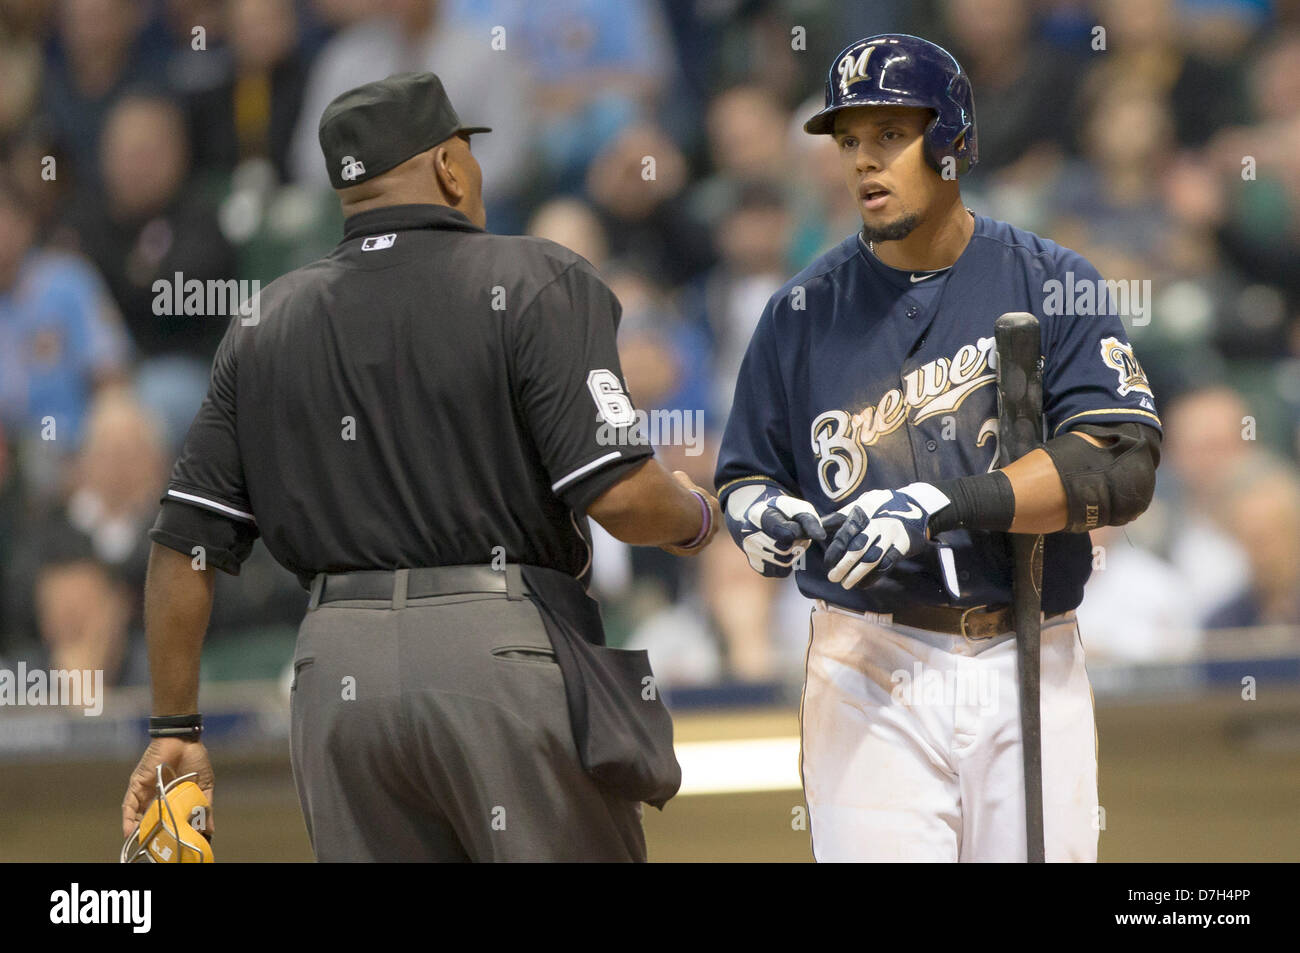 Milwaukee, Wisconsin, USA. 7th May 2013. Milwaukee center fielder Carlos Gomez #27 tries to explain to the home plate umpire that the pitch hit him. Milwaukee leads Texas 6-3 in the 8th inning at Miller Park in Milwaukee, WI. John Fisher/CSM/Alamy Live News Stock Photo